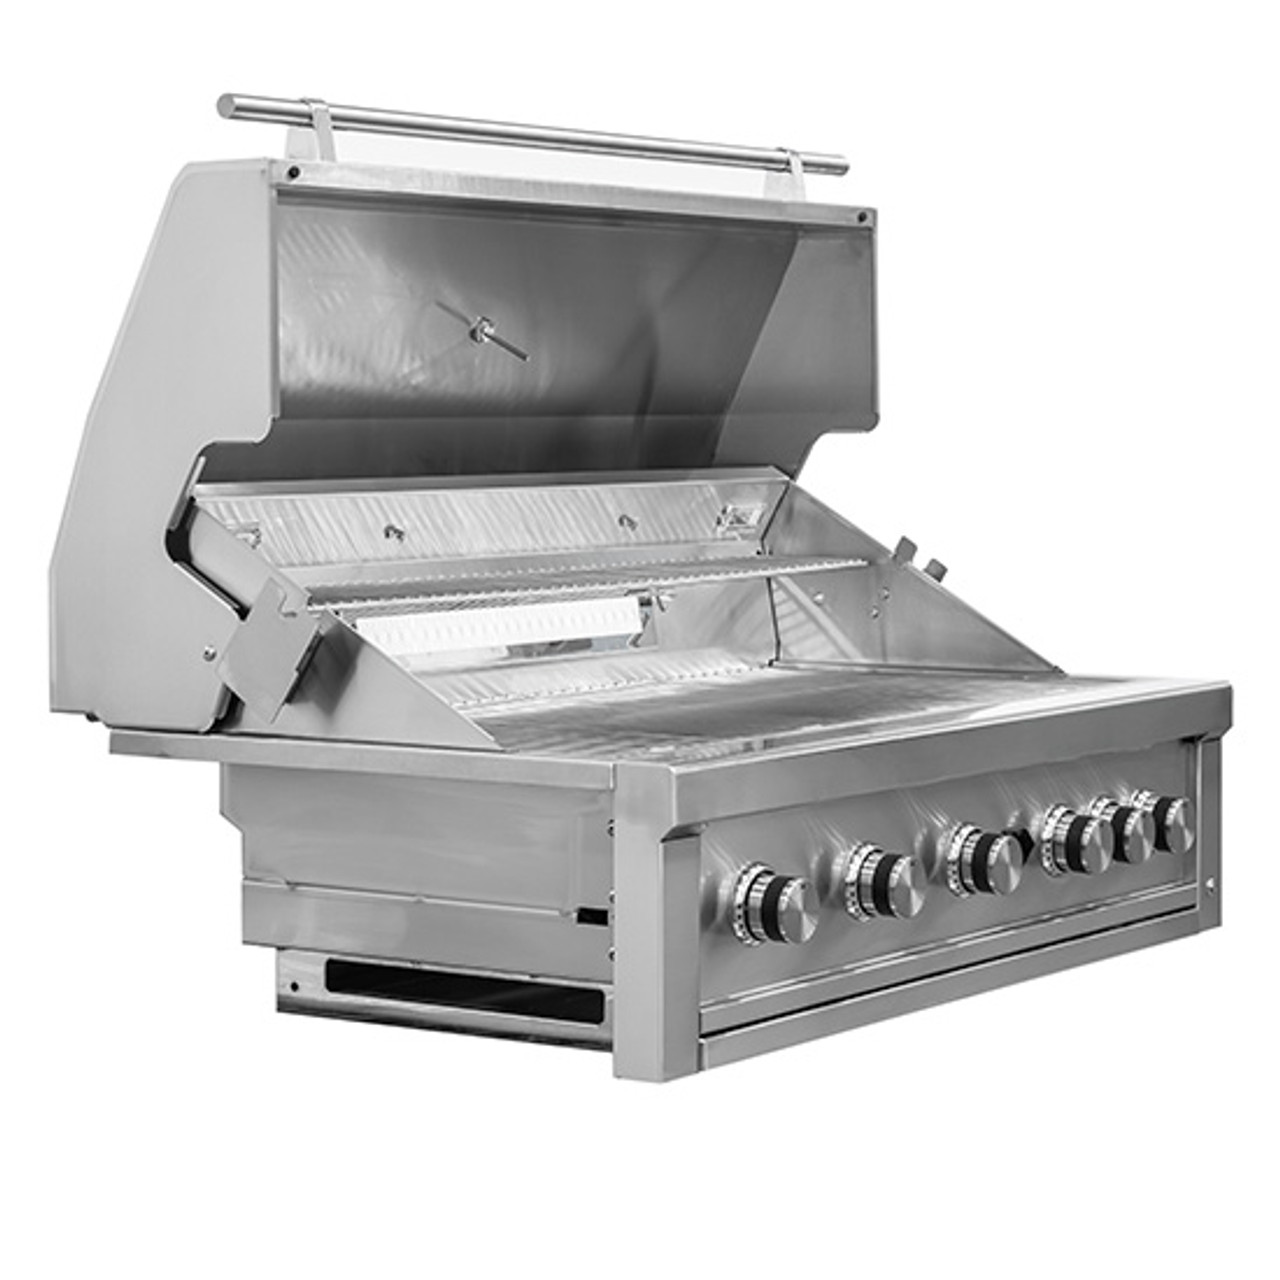 American Made Grills Estate 42-Inch Gas Grill - Patio Fever